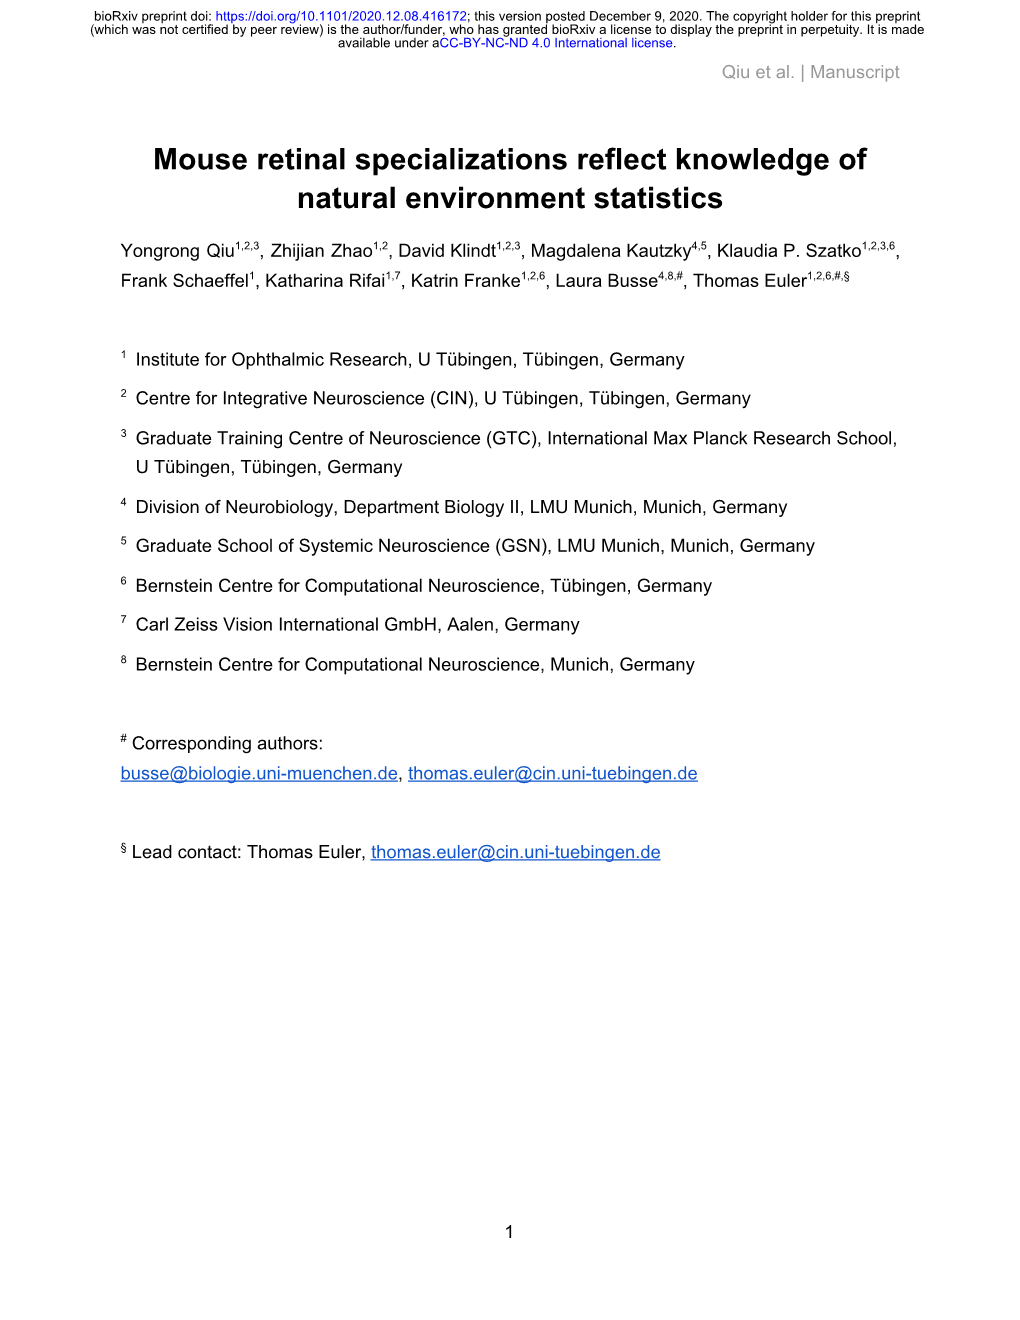 Mouse Retinal Specializations Reflect Knowledge of Natural Environment Statistics